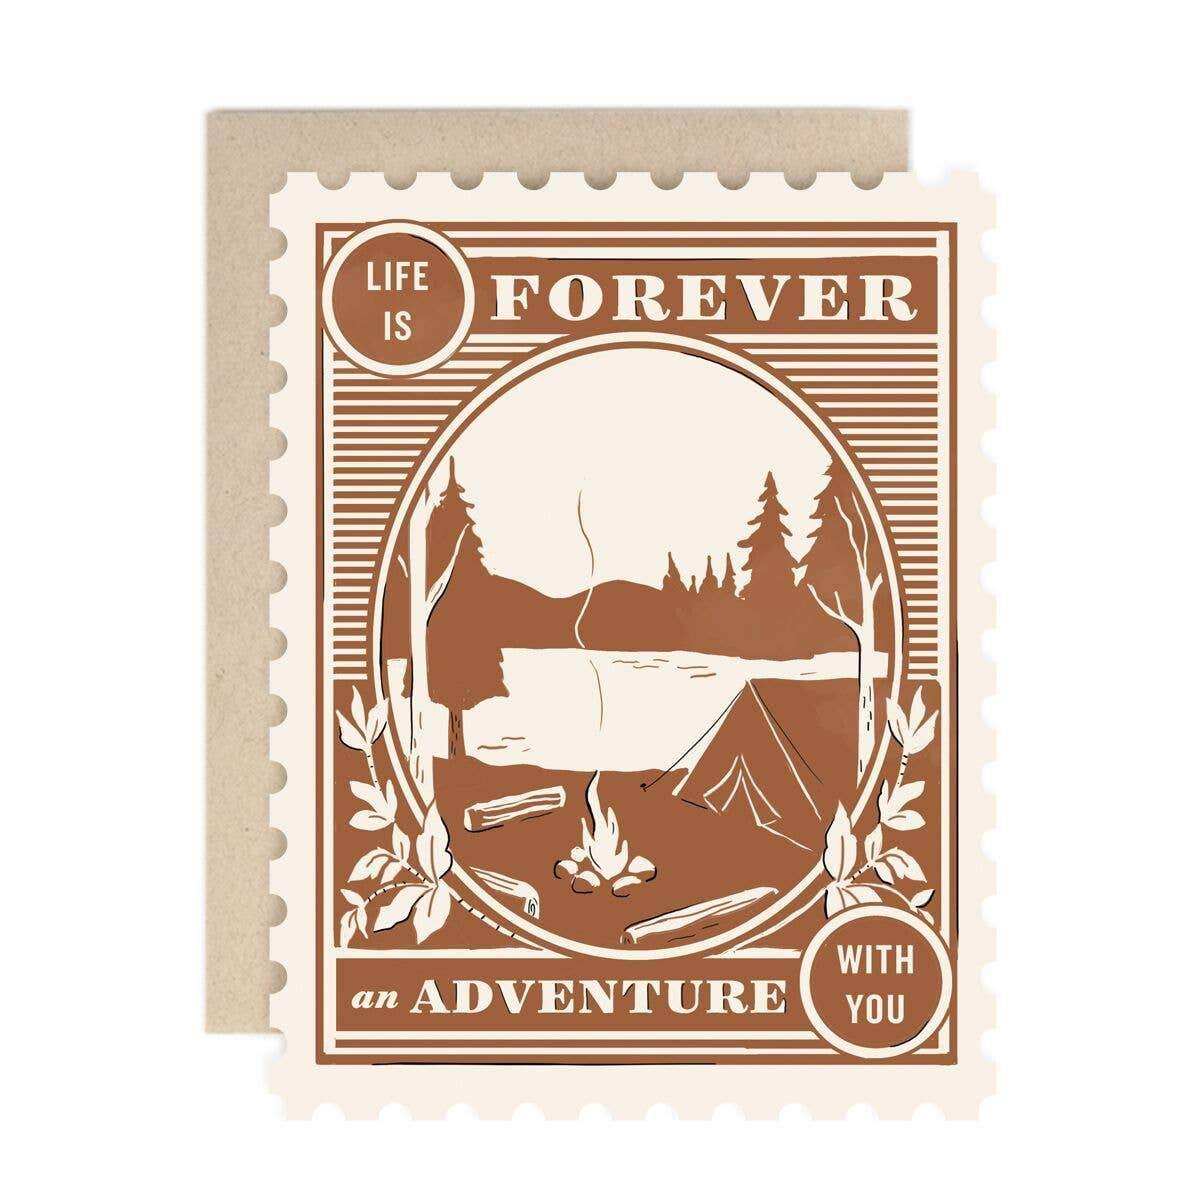 Forever an Adventure Card - DIGS